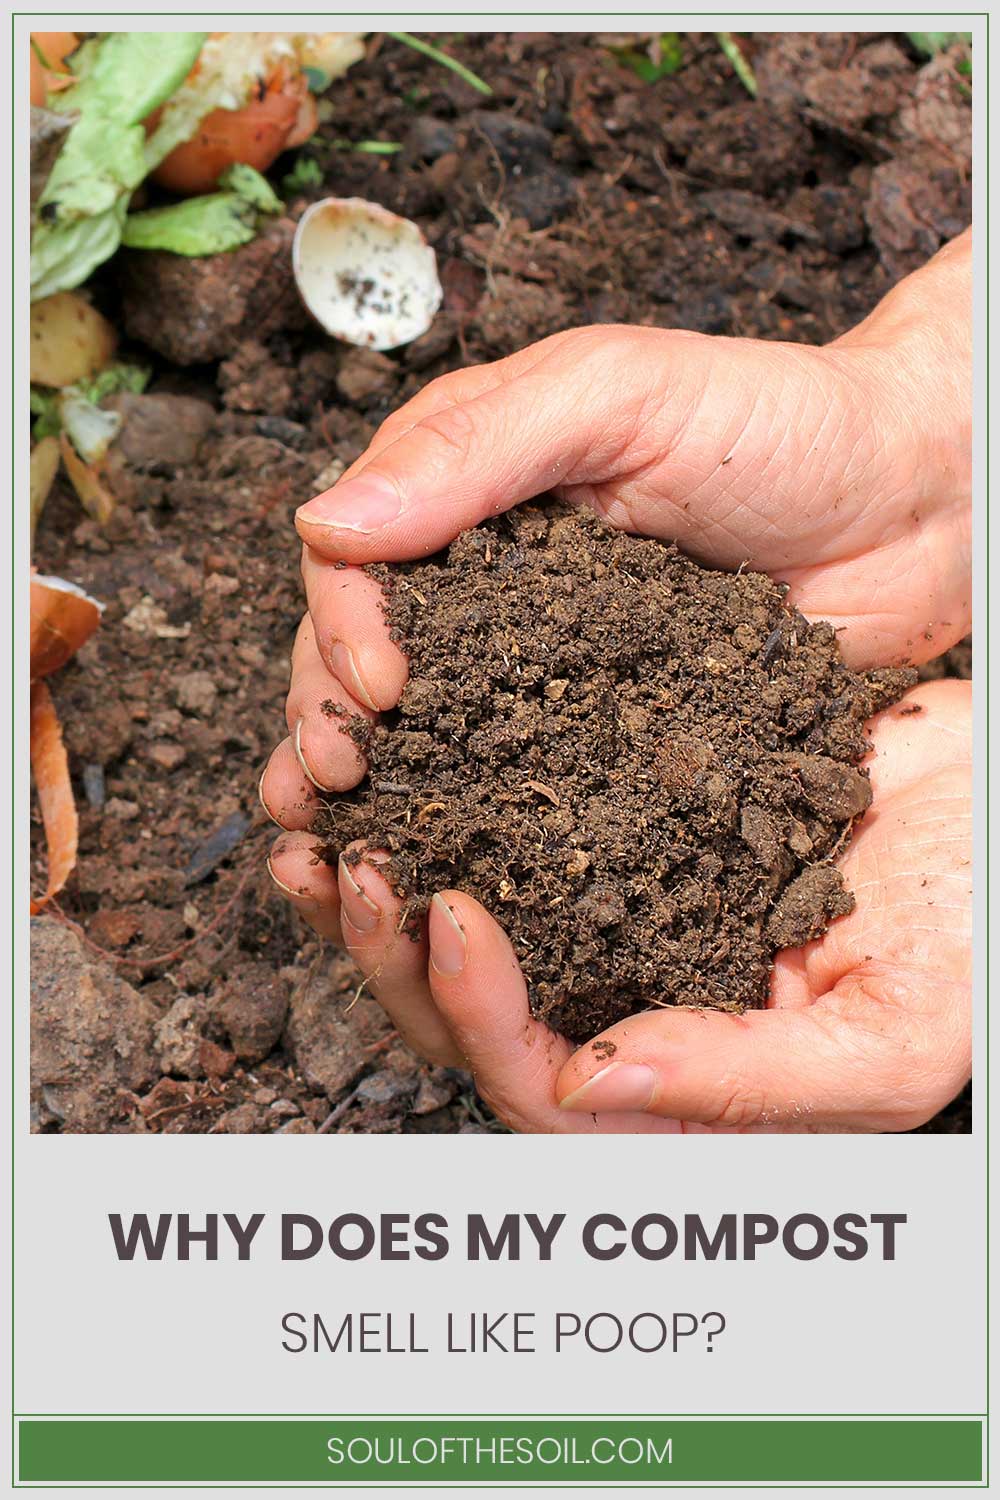 Why does my compost smell like poop?